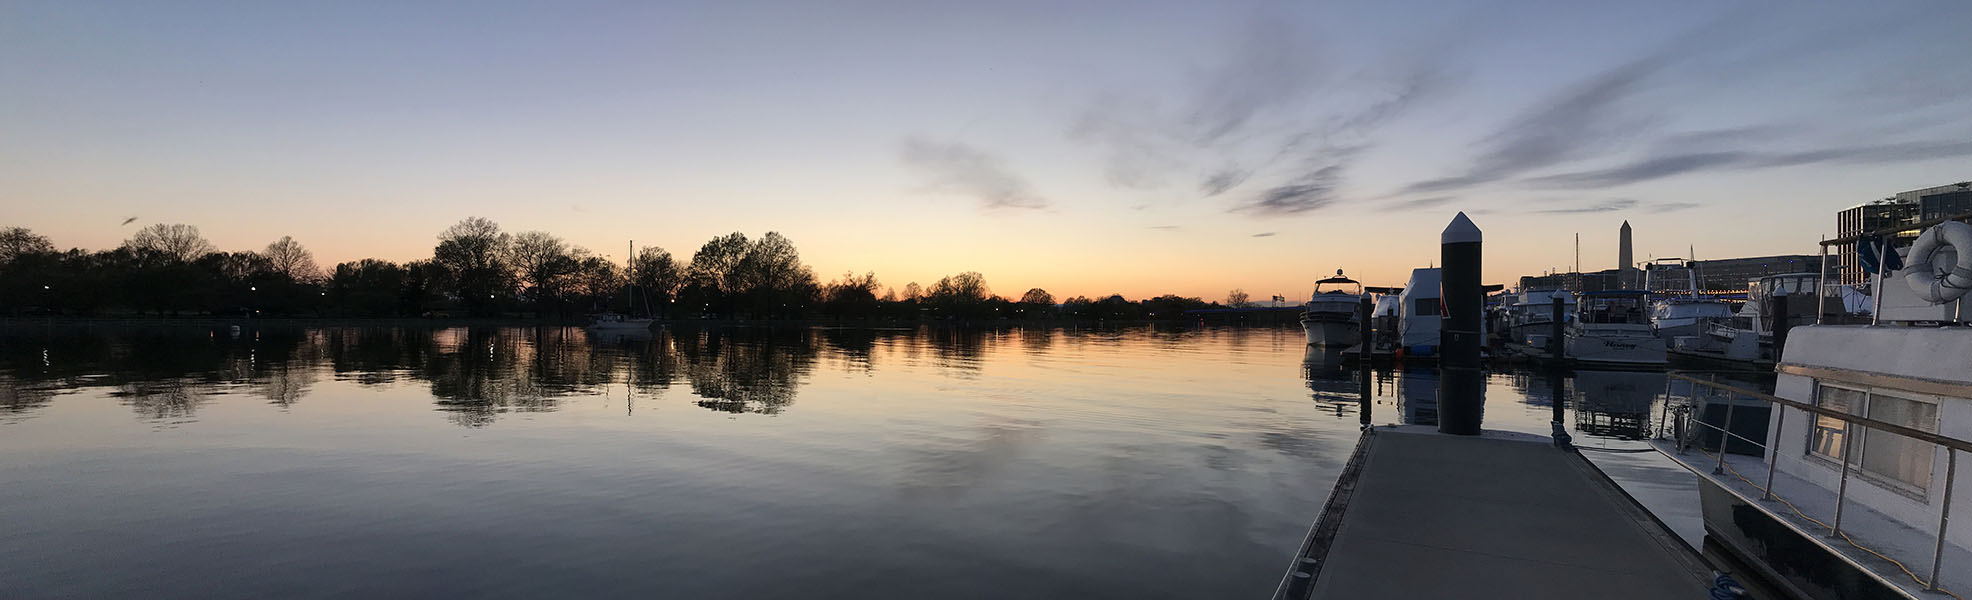 Panorama of Water, Shore, and Sunset.